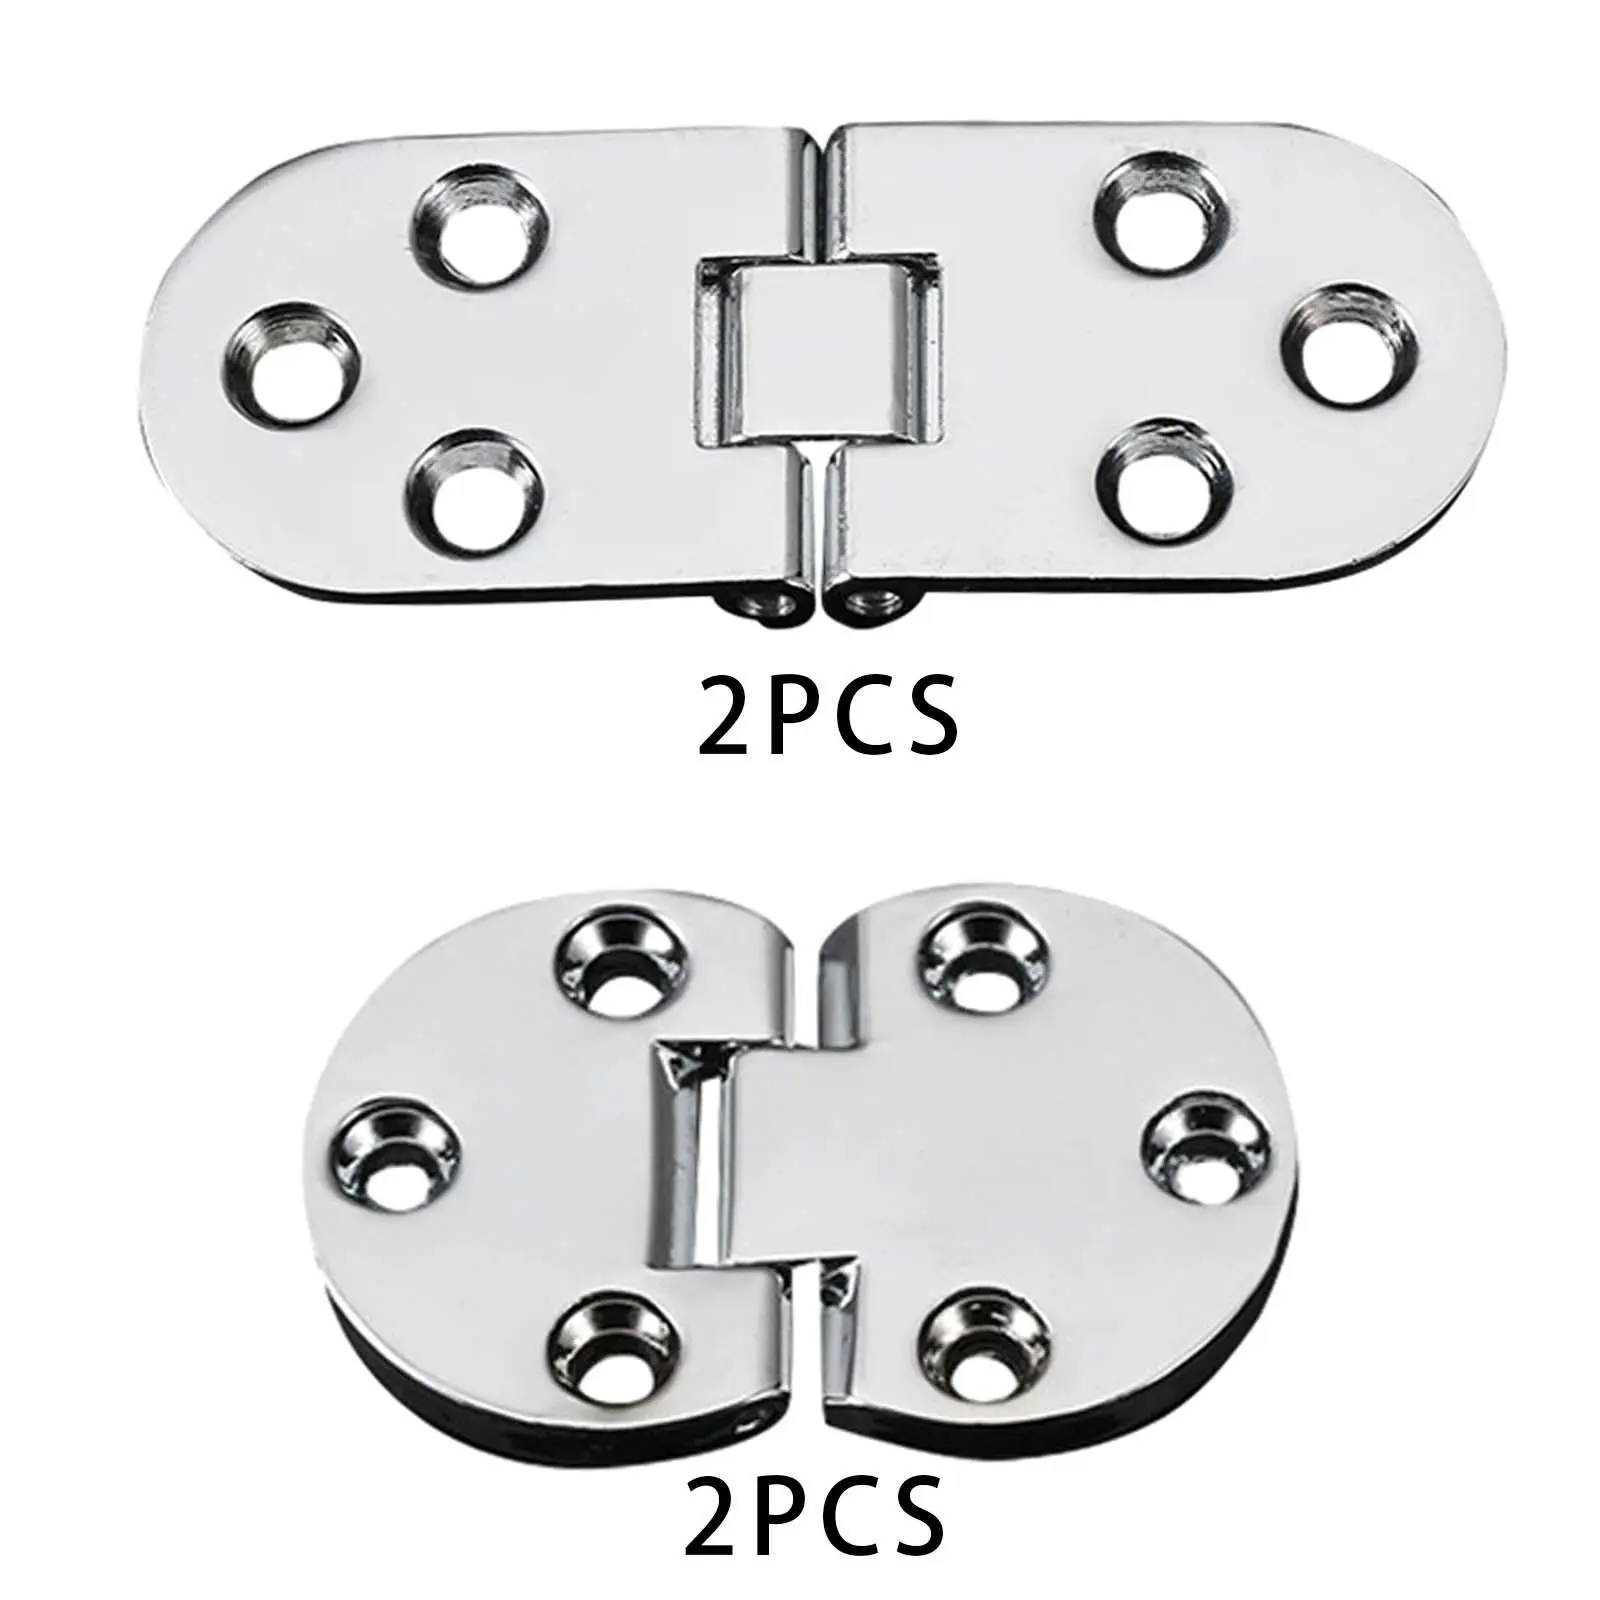 2x Folding Table Hinges Replacement 180 Degree Flip Hinges Cabinet Hinges for Computer Desk Butler Tray Doors Cabinet Wardrobe